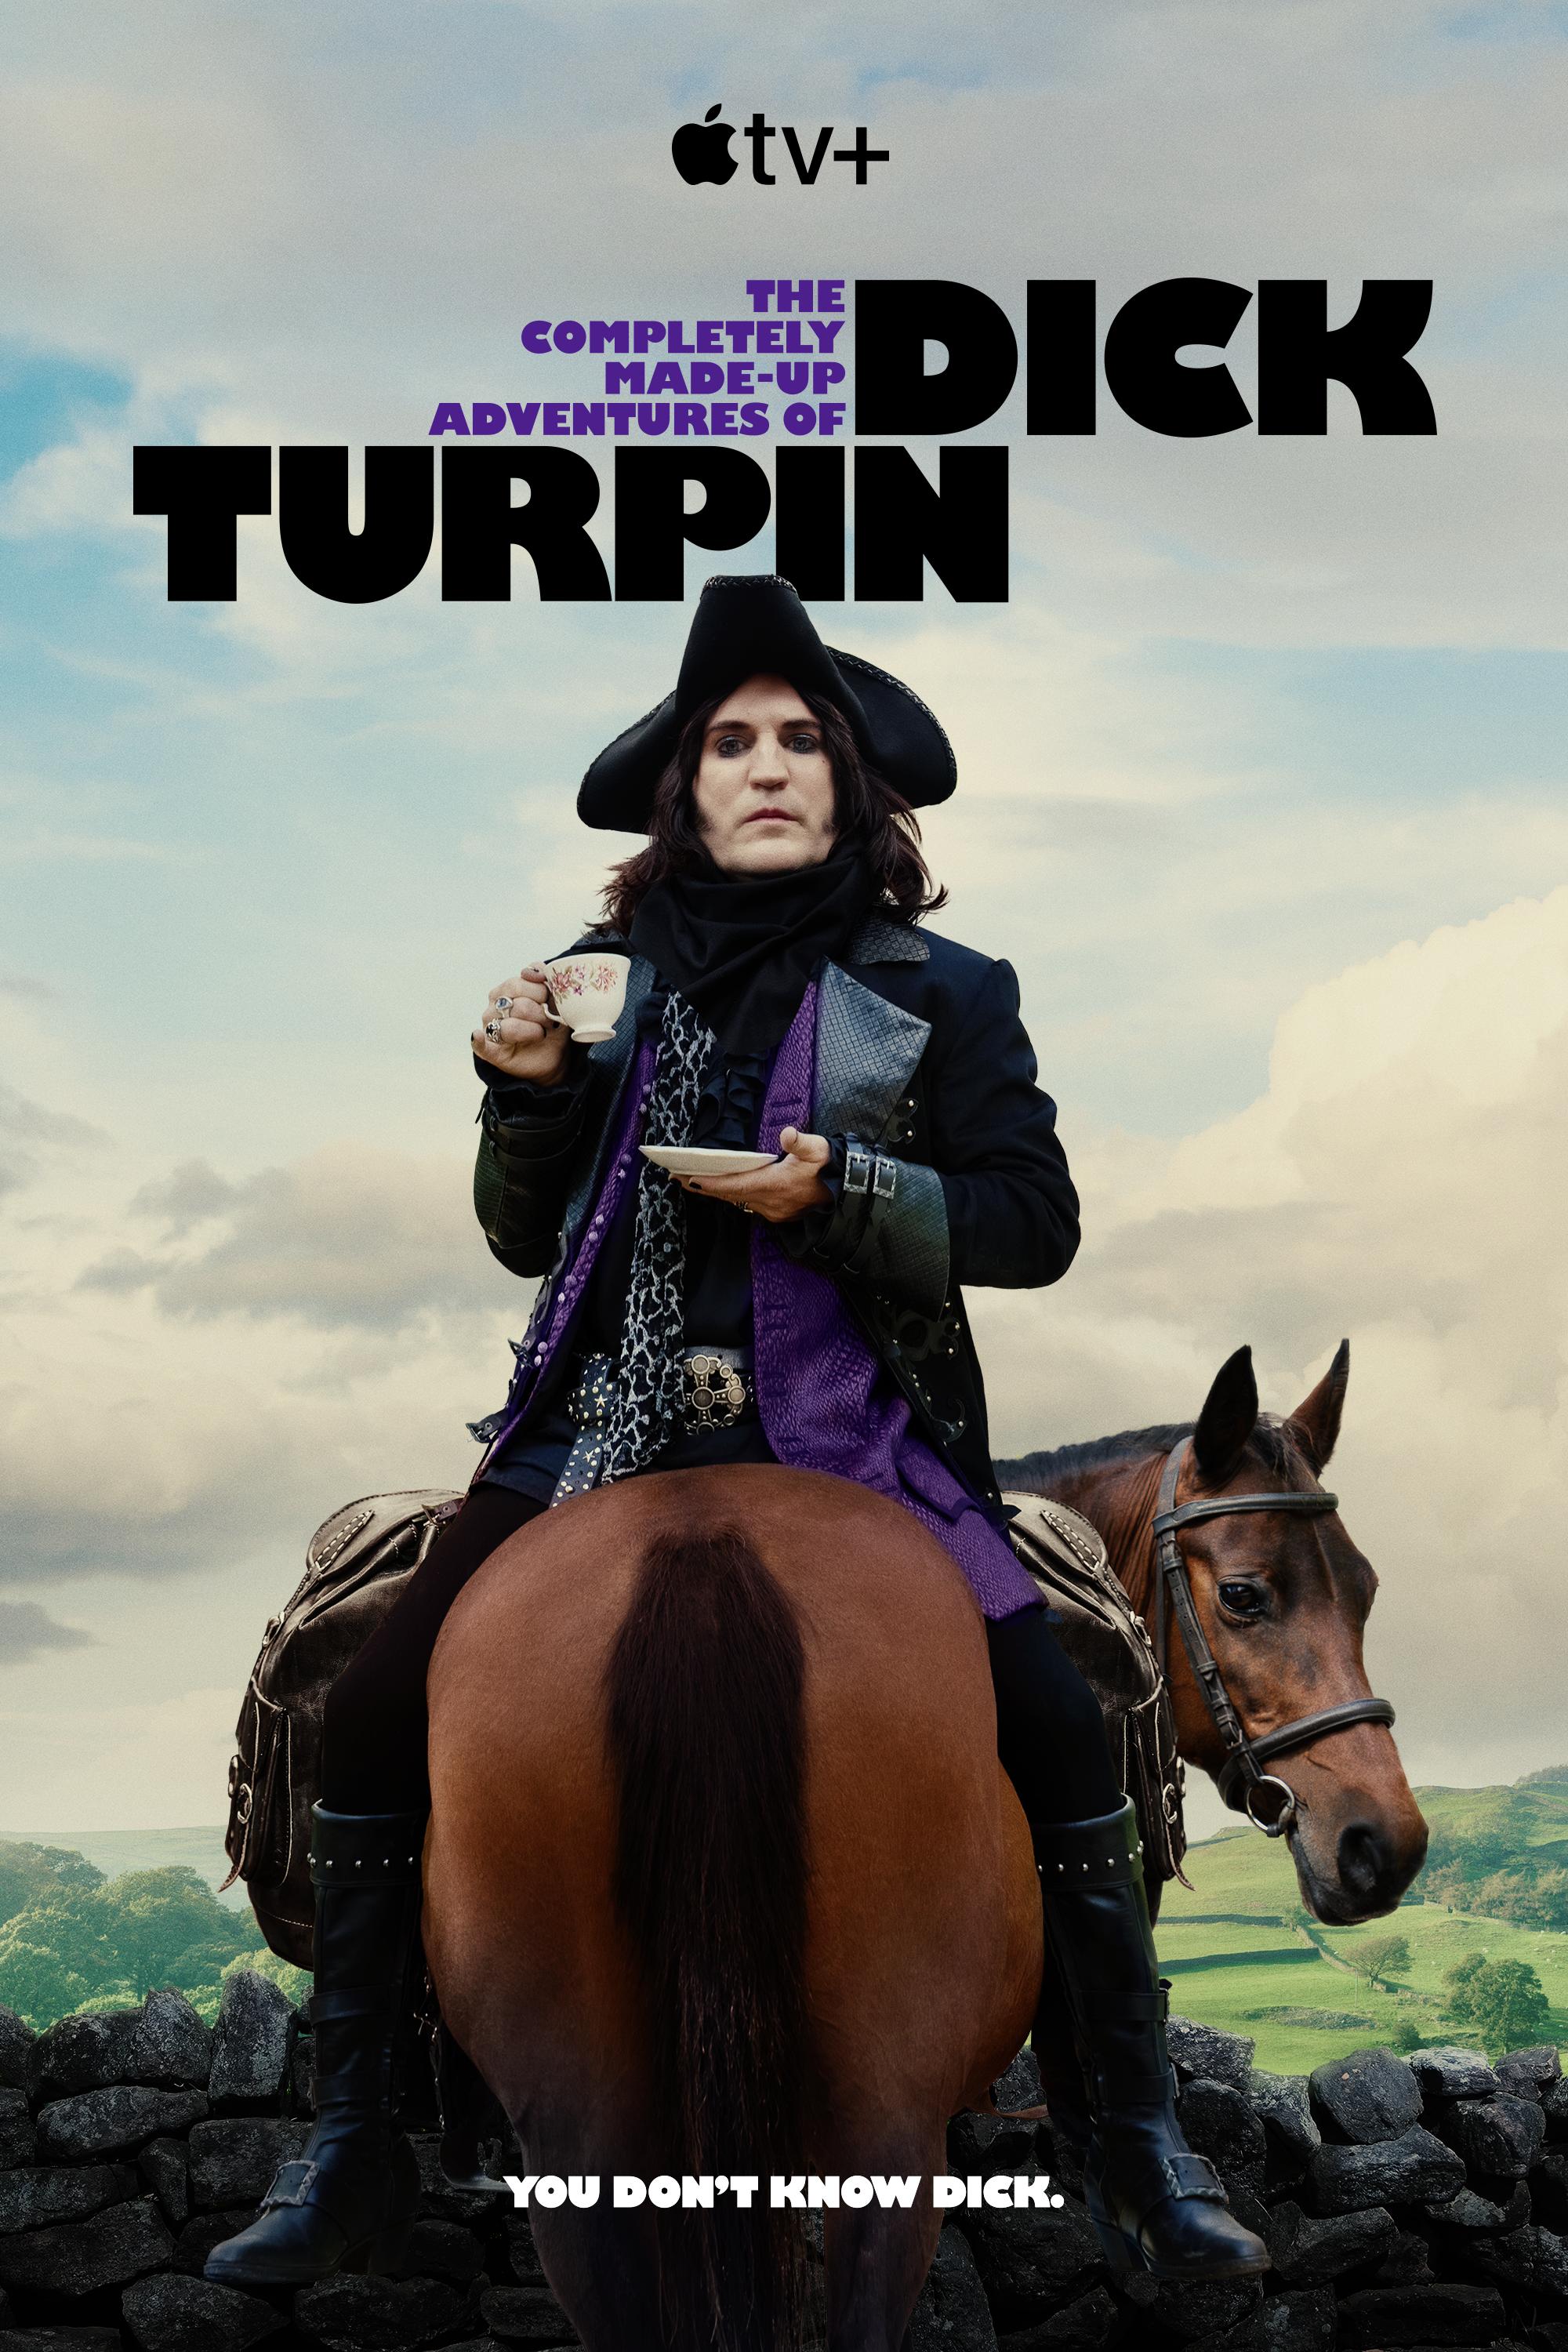 TV ratings for The Completely Made-Up Adventures Of Dick Turpin in Países Bajos. Apple TV+ TV series